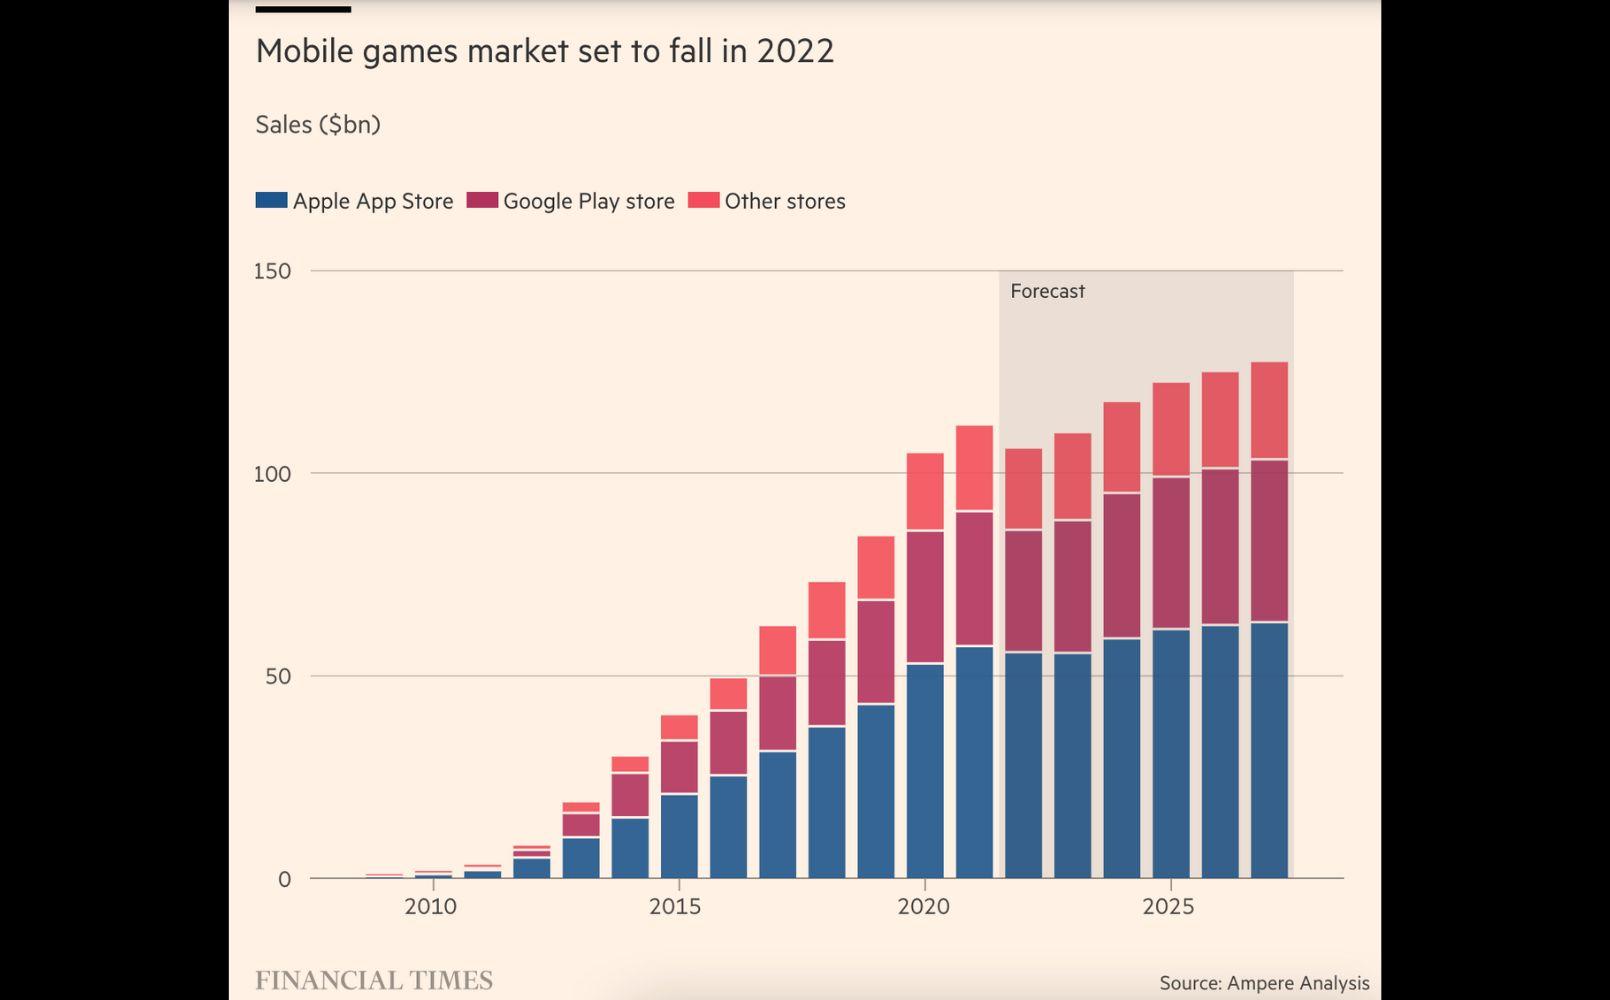 Mobile games market set to fall